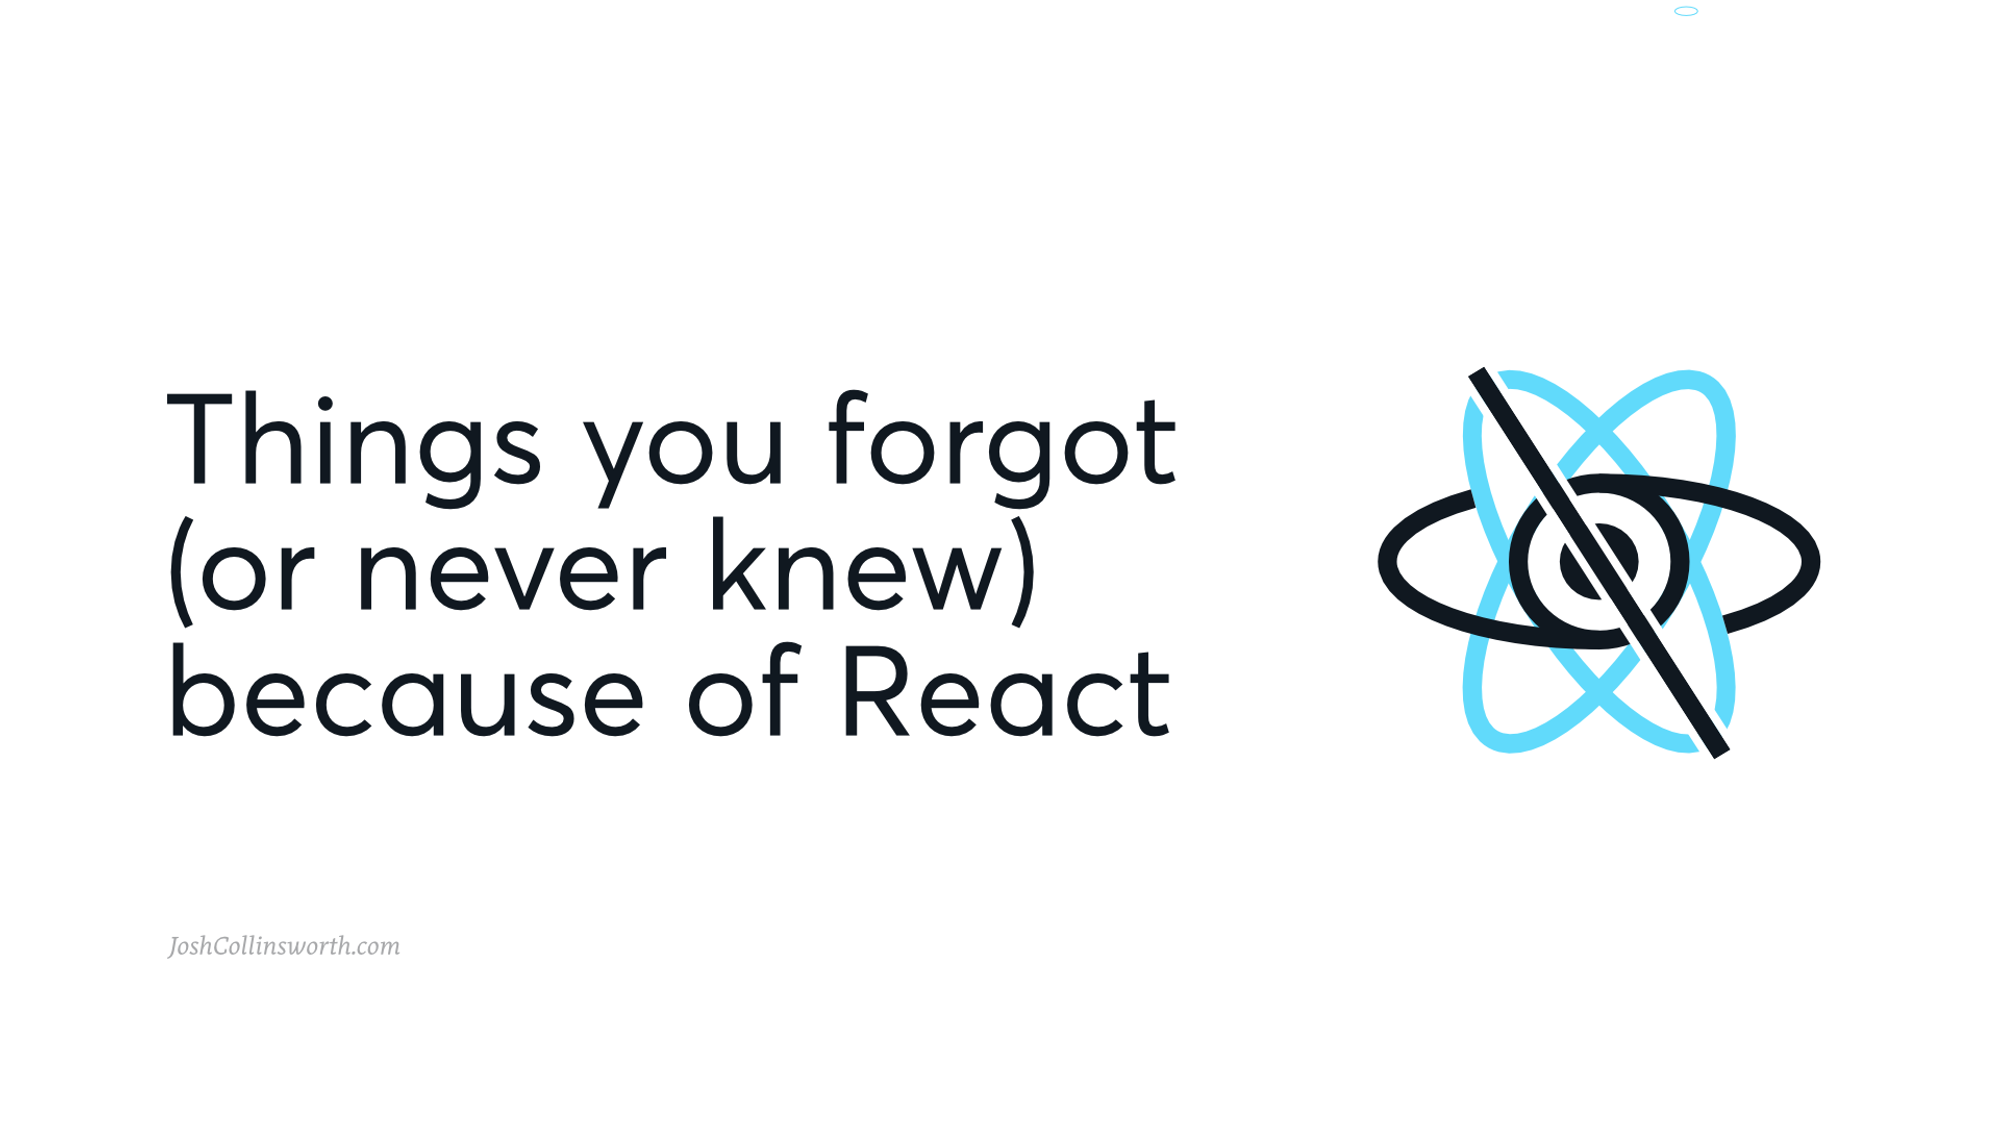 Things you forgot (or never knew) because of React